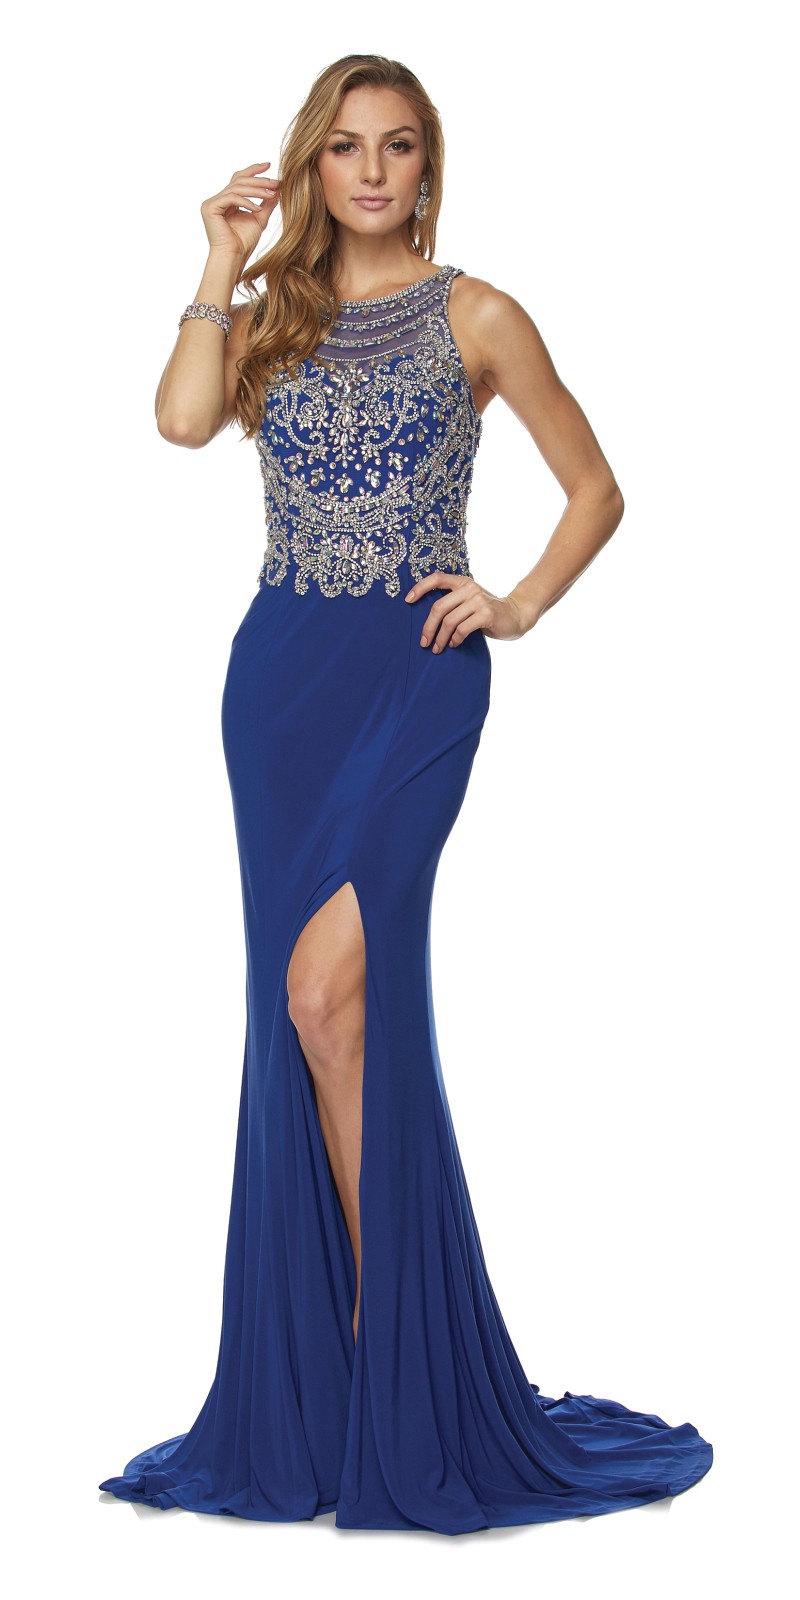 Juliet 616 Royal Blue Cut Out Back Beaded Bodice Prom Gown with Train 